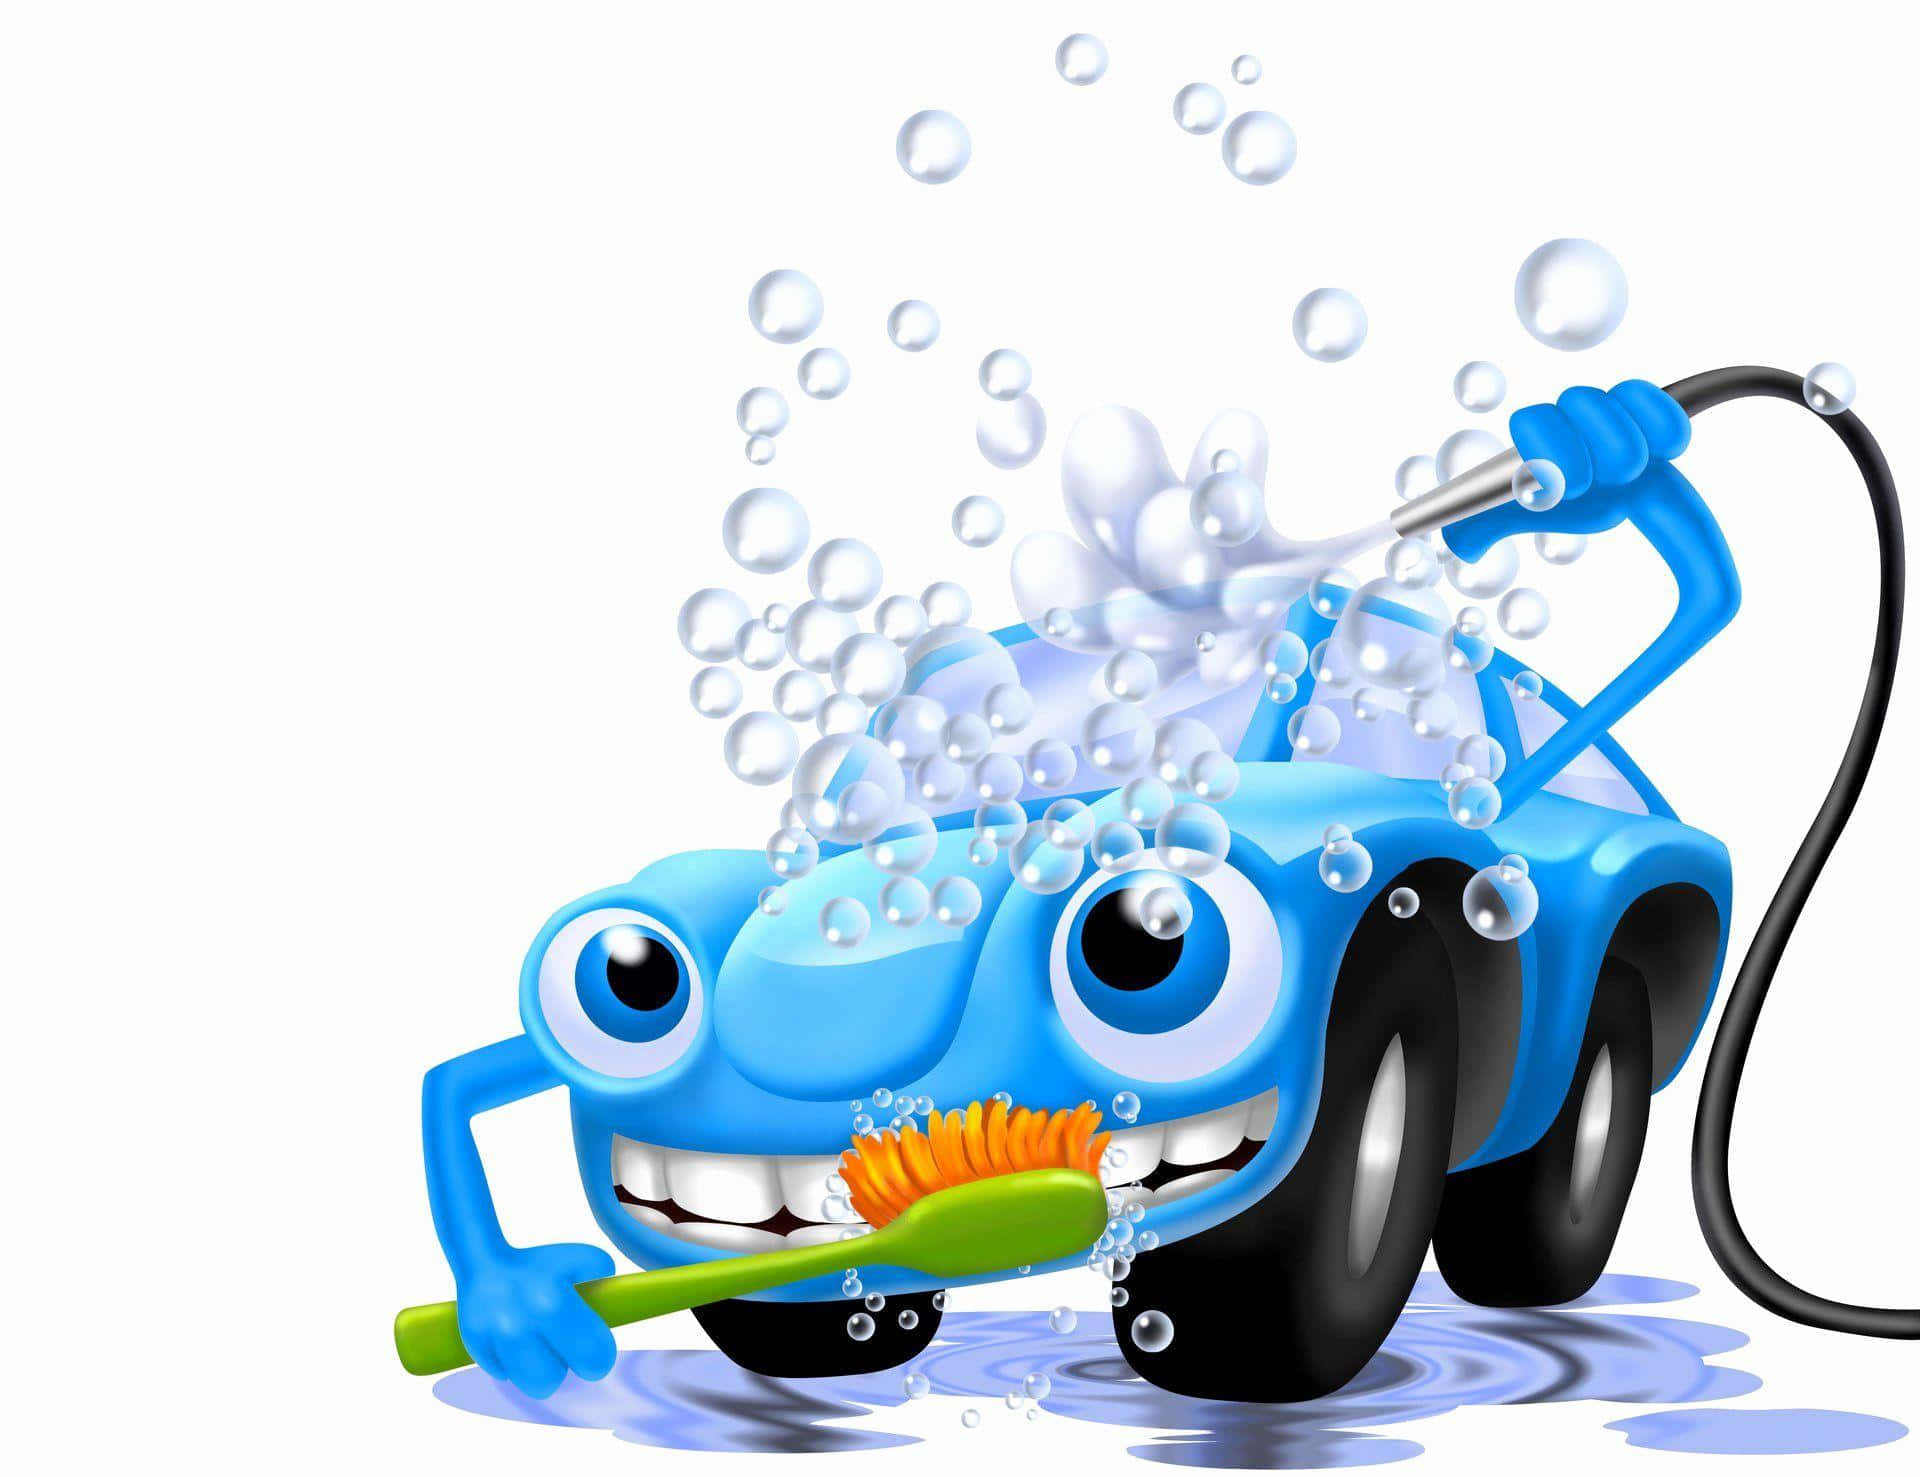 Keep your car looking new with regular washes!